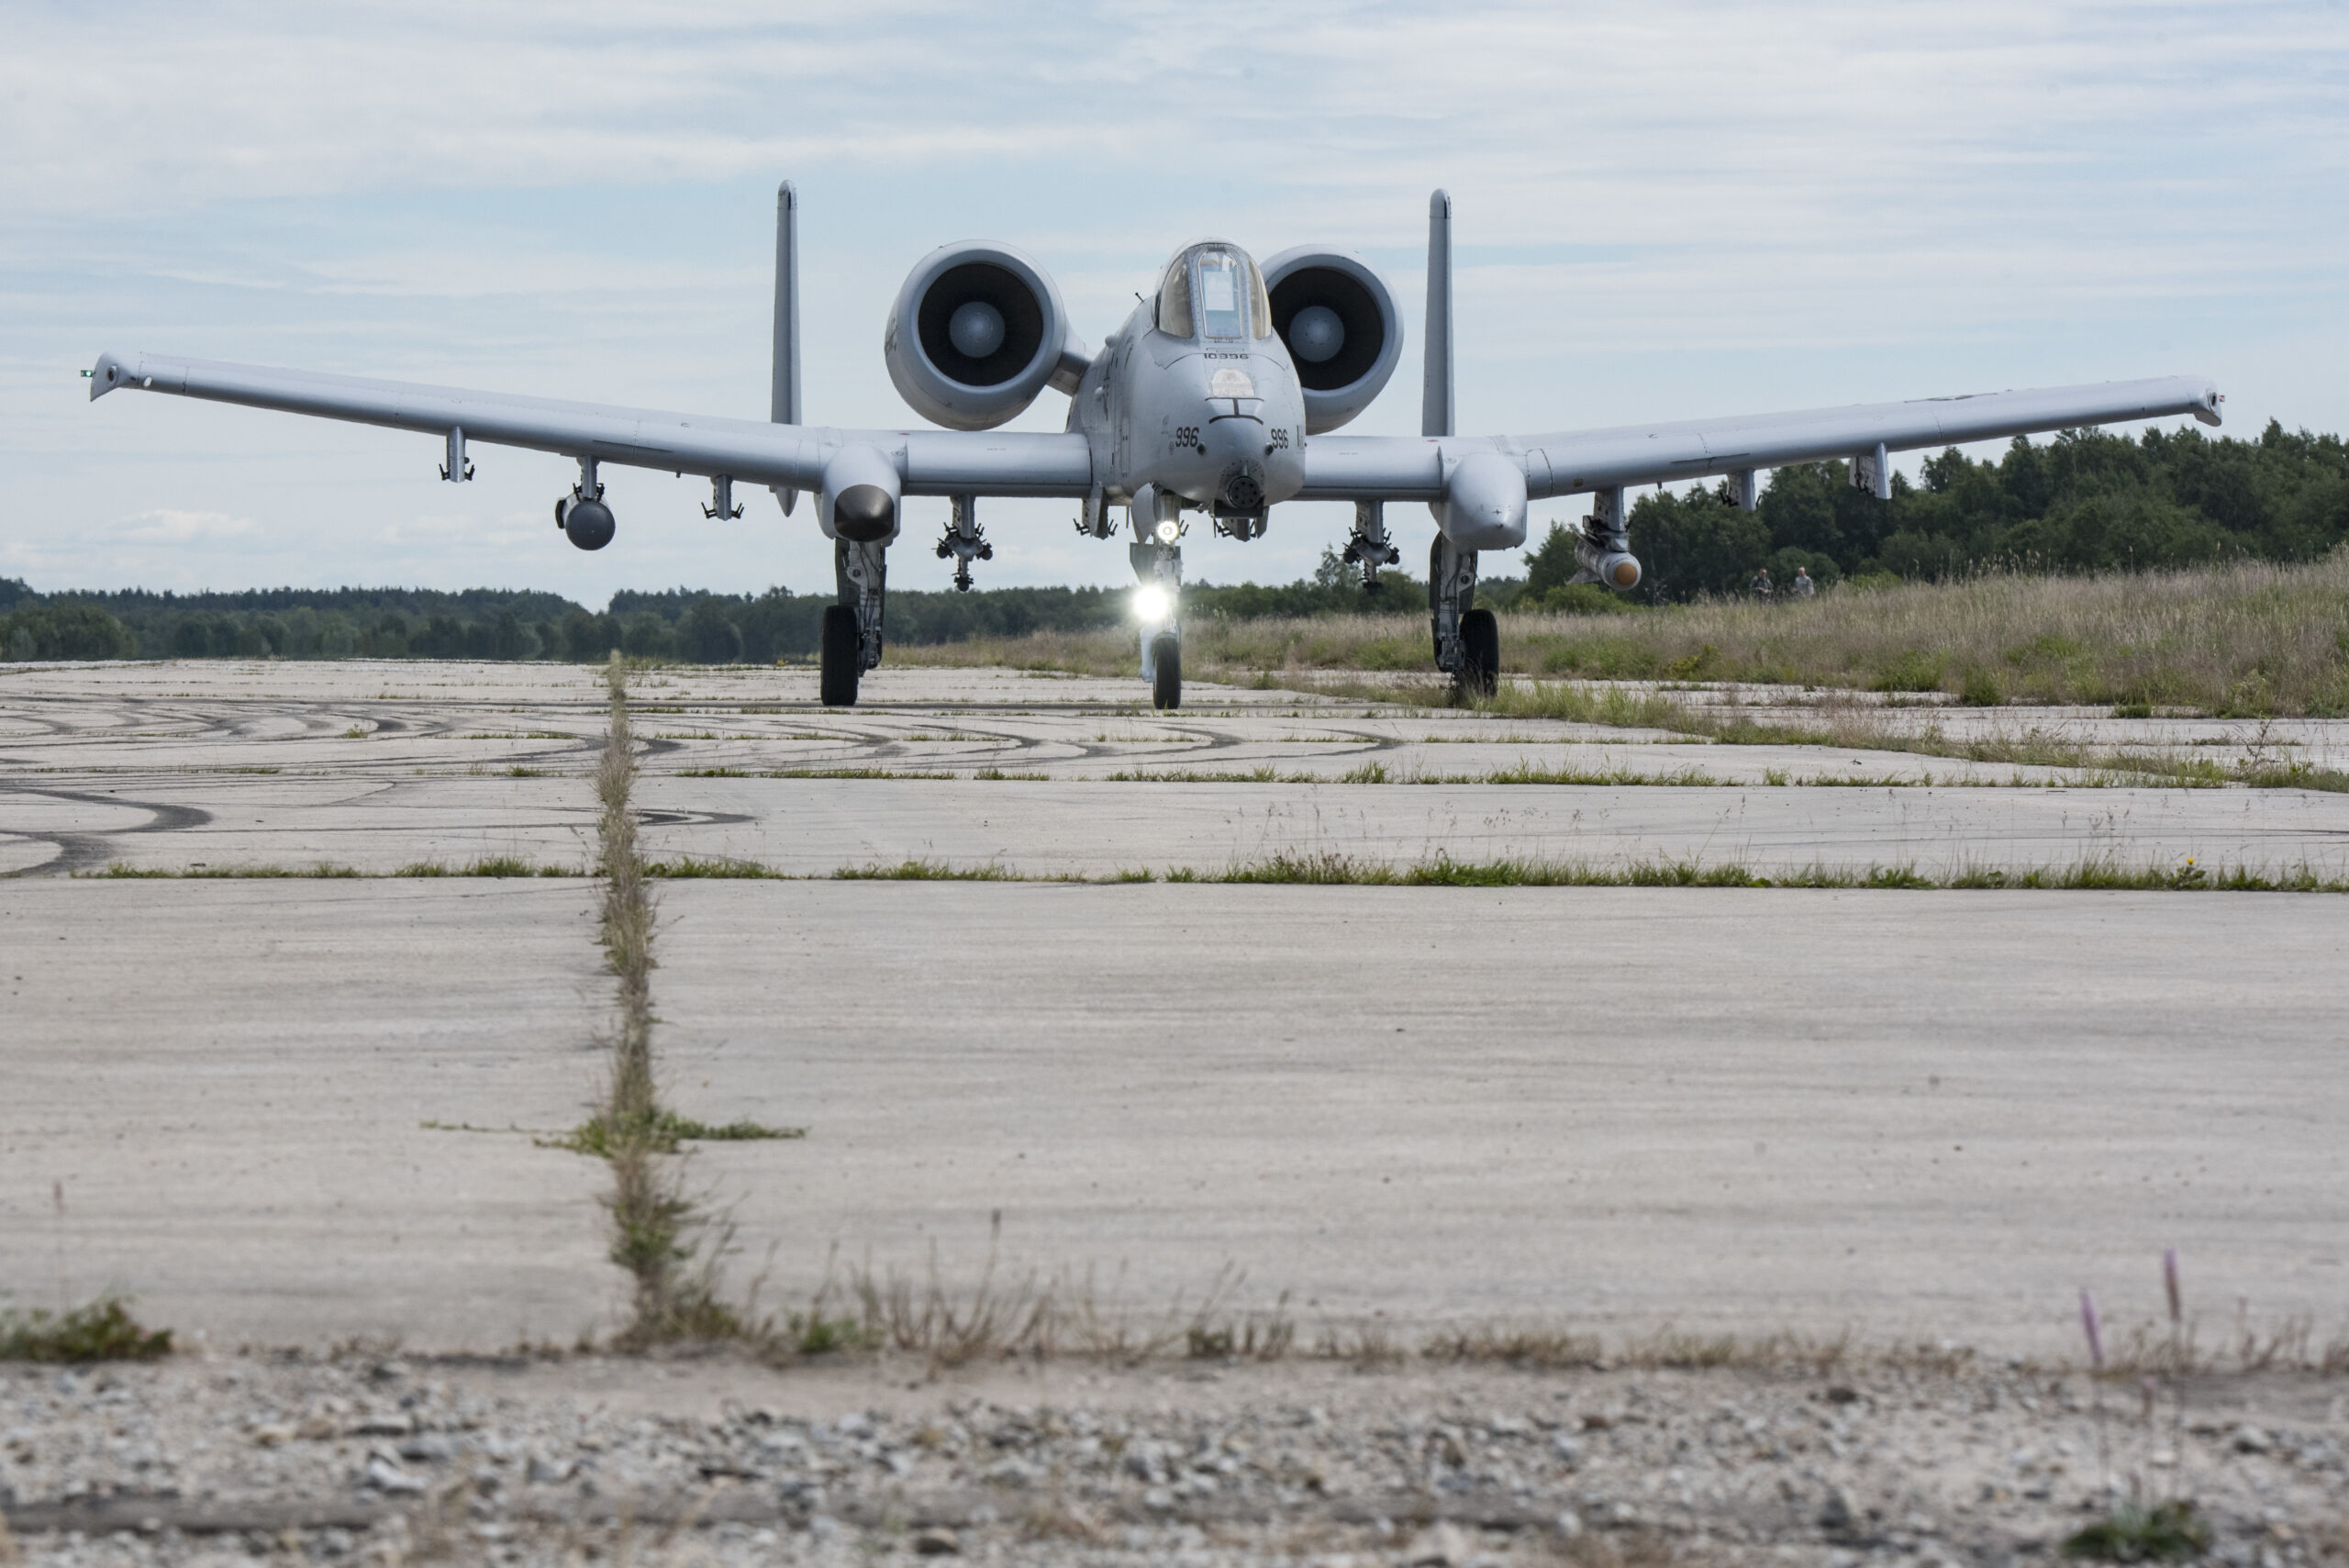 U.S. Air Force A-10 Thunderbolt II, assigned to 107th Fighter Squadron, Selfridge, Mich., practice landing on a un-operational, austere runway in Haapsalu, Estonia, during Saber Strike 18 June 7, 2018. This event tests and demonstrates USAF capability to perform unimproved surface operations invaluable to pilots and combat controllers in preparation for effective responses, while training with NATO's enhanced Forward Presence (eFP) battlegroups. (U.S. Air National Guard photo by Staff Sgt. Bobbie Reynolds)